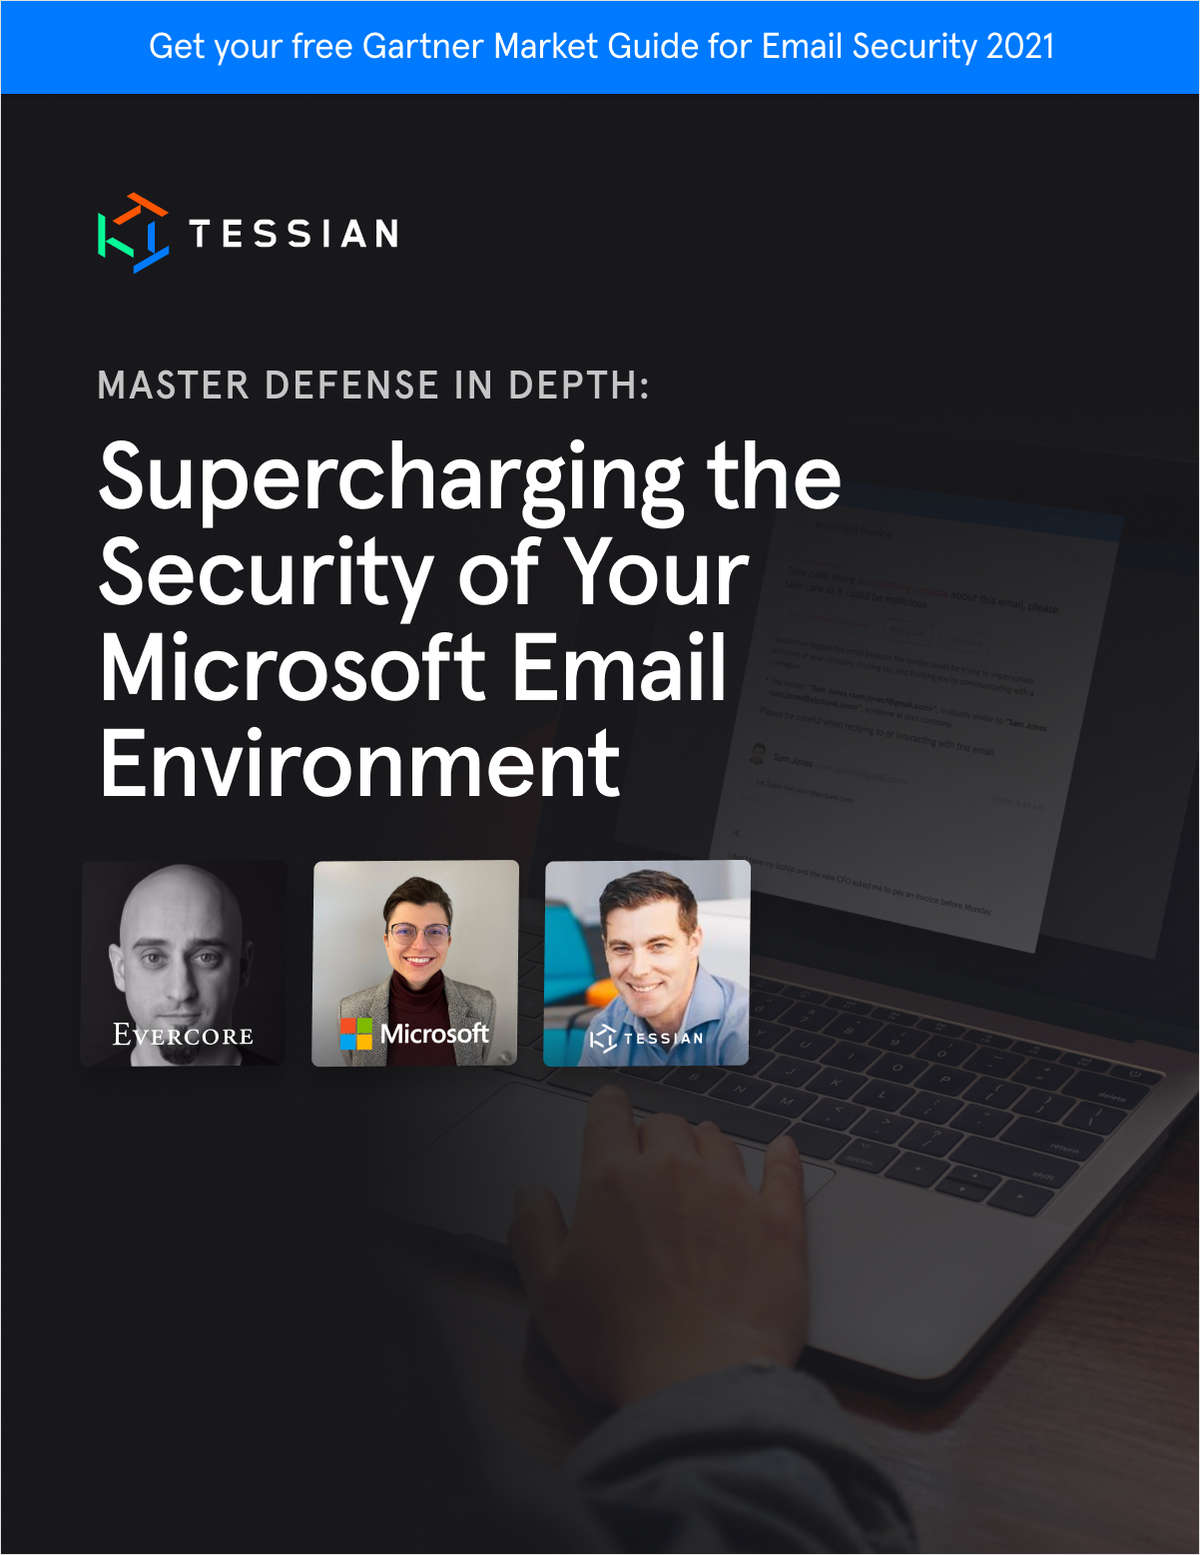 Master Defense in Depth: Supercharging the Security of Your Microsoft Email Environment